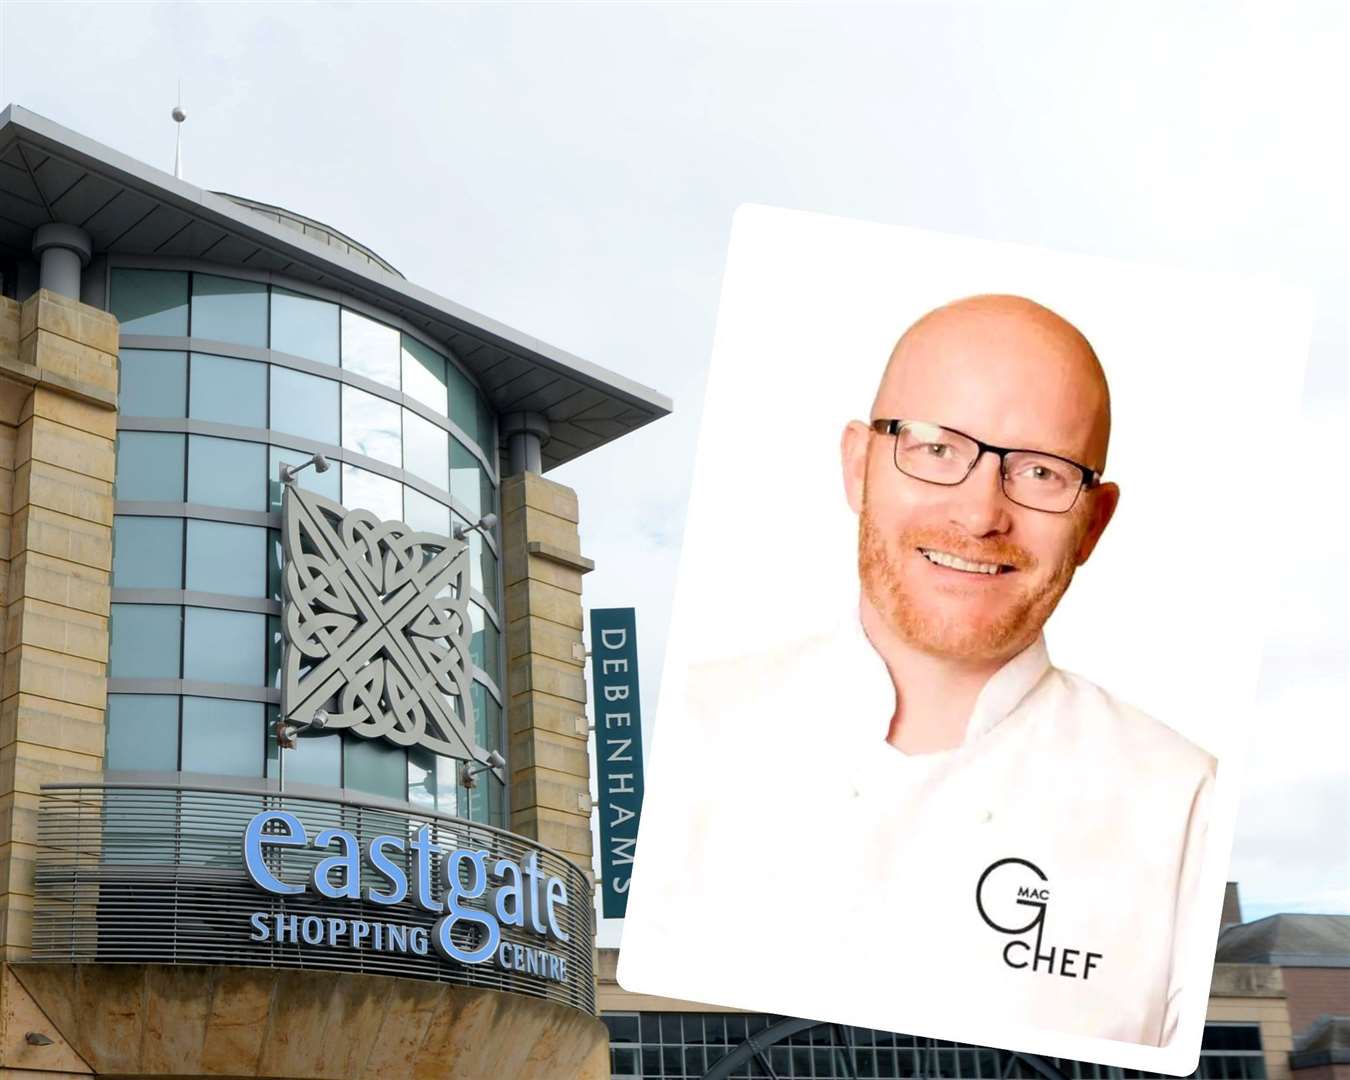 Gary Macklean (inset) is excited about his new venture at Eastgate Shopping Centre.